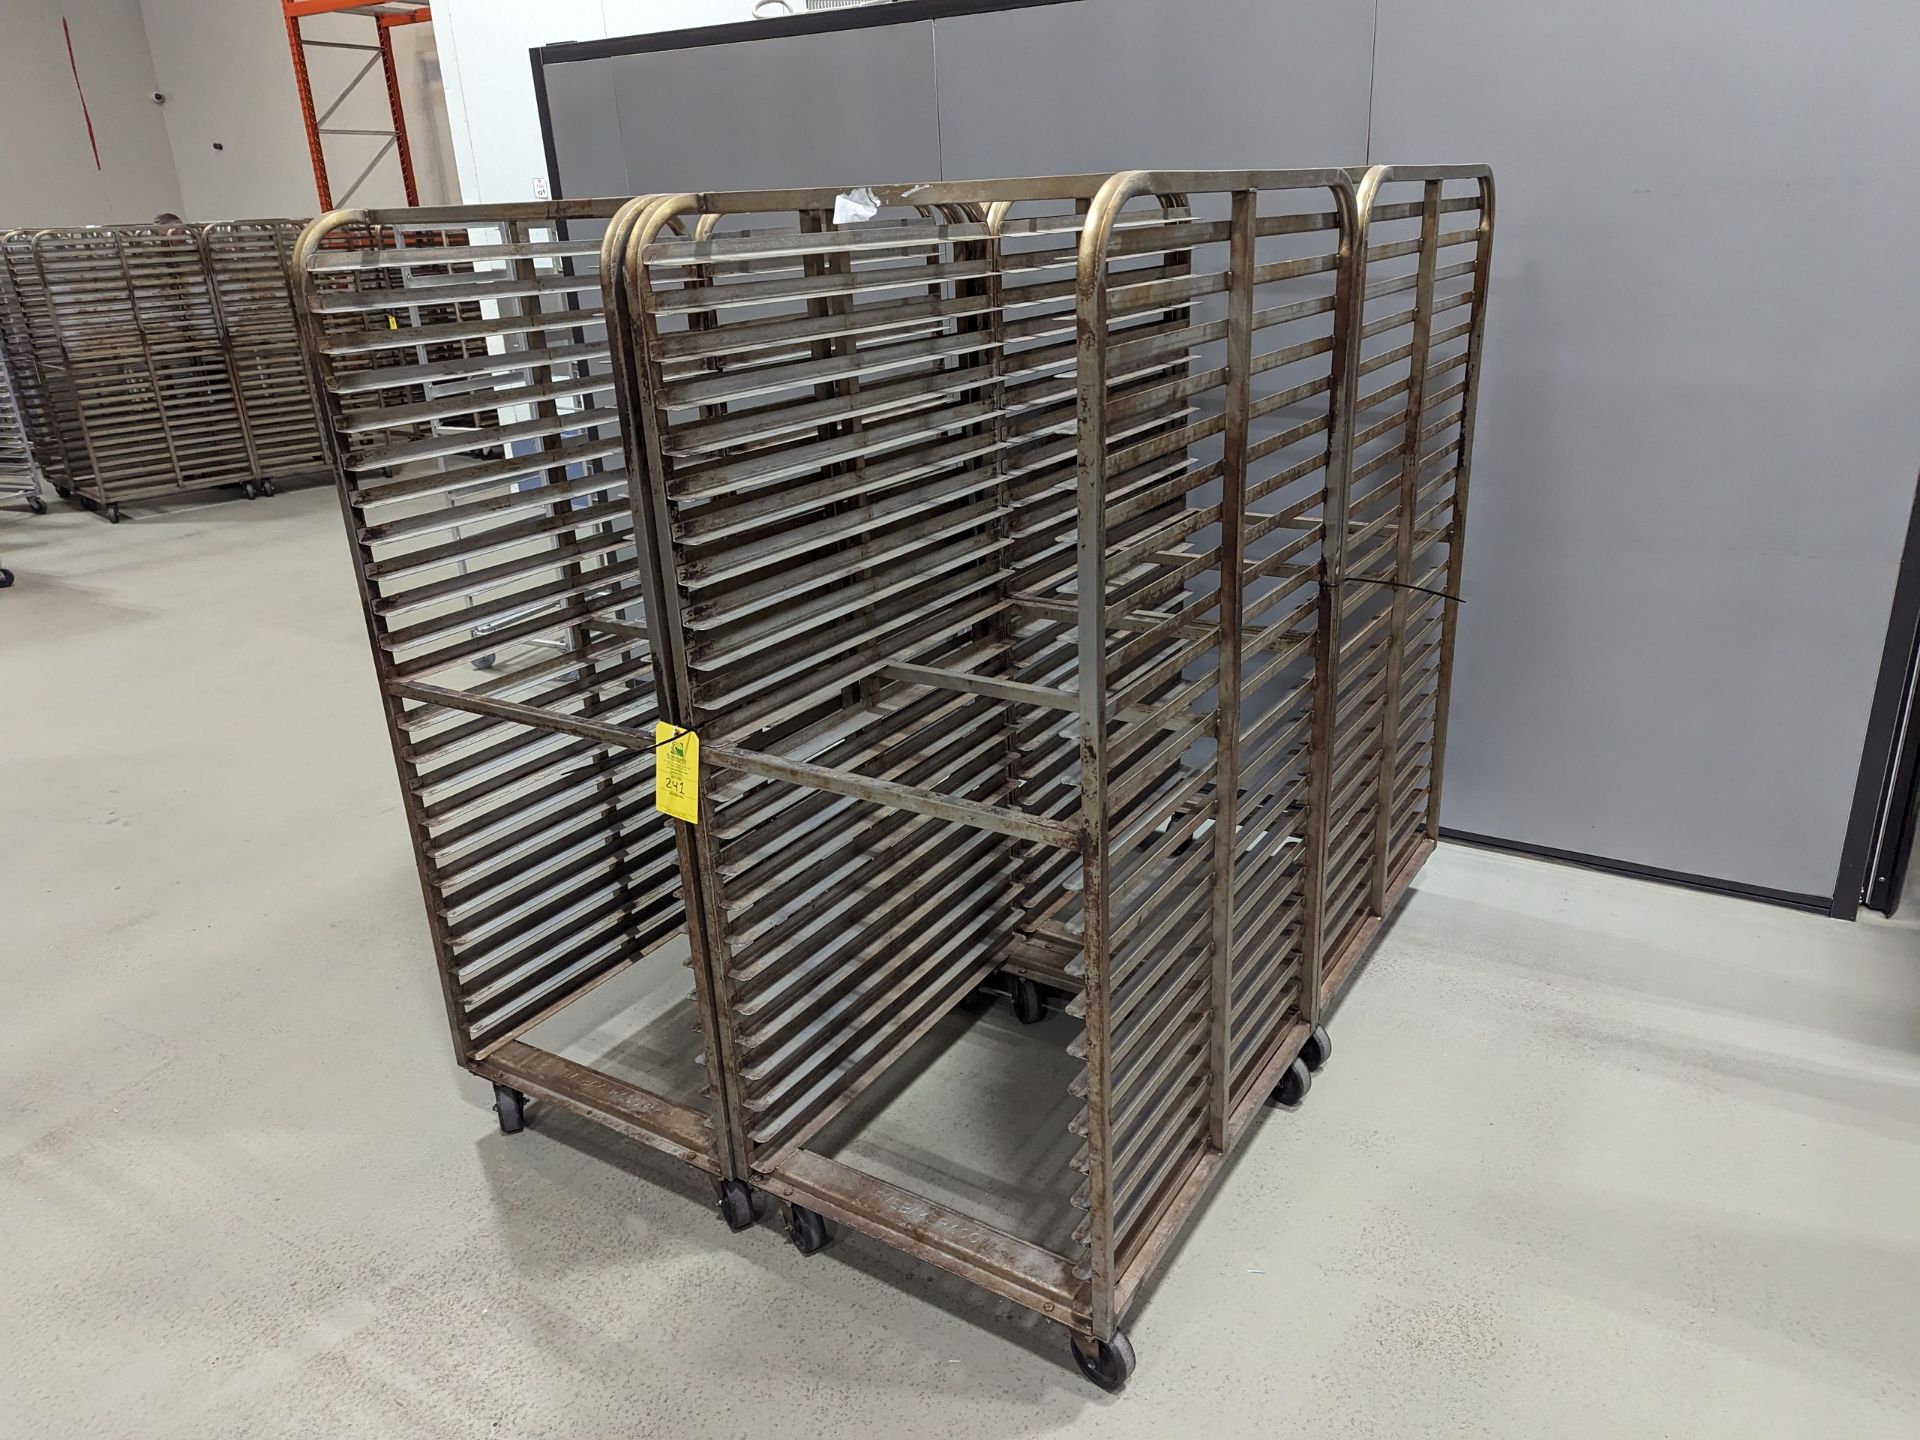 Lot of 4 Double Wide Stainless Steel Bakery Racks, Dimensions LxWxH: 72x57x69 Measurements are for l - Image 2 of 6